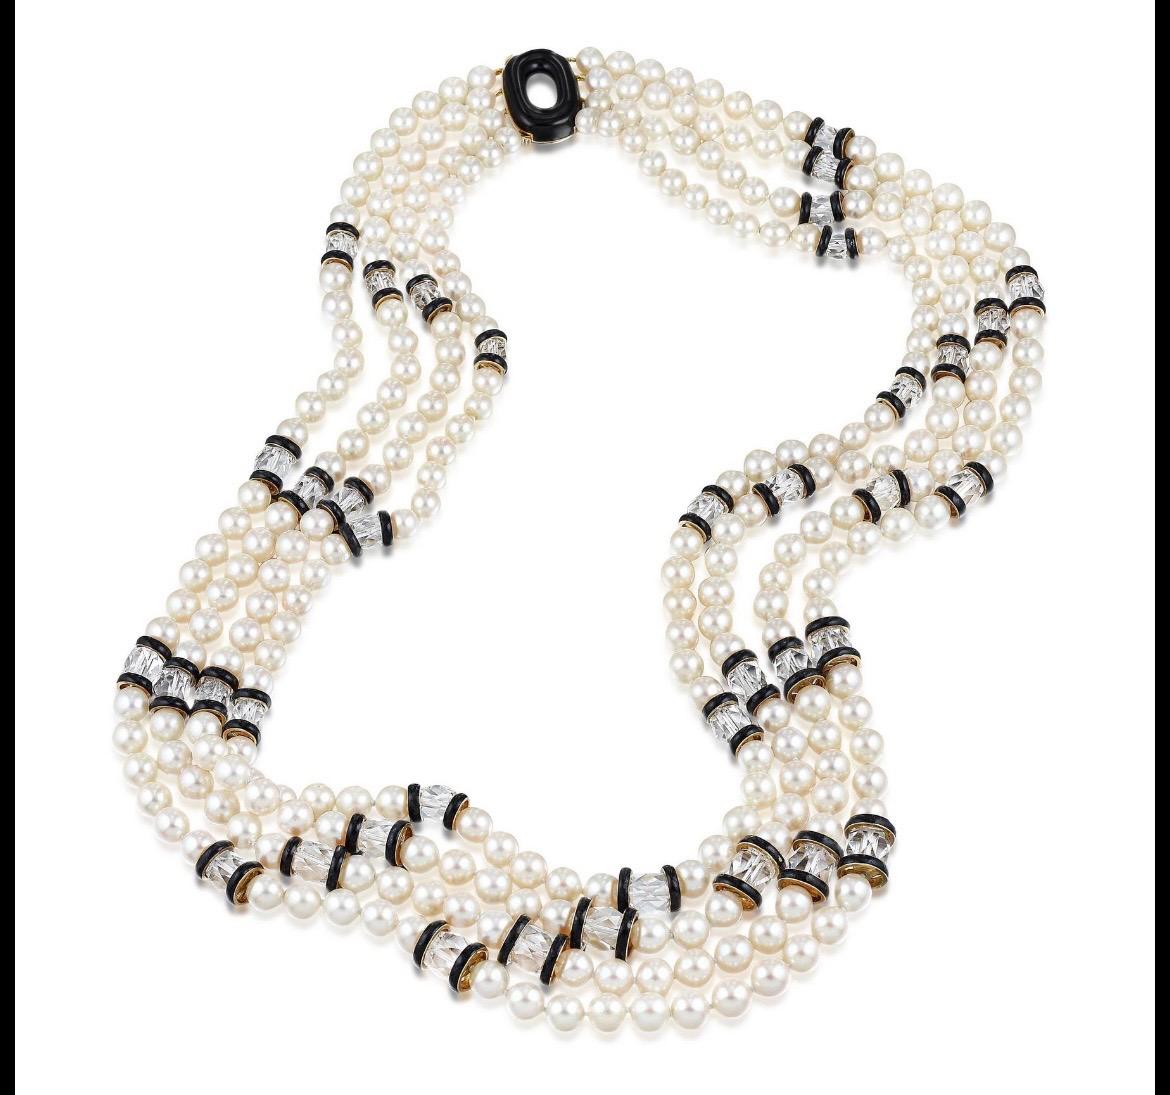 Bead David Webb 4 Strand Pearl, Rock Crystal and Onyx Necklace For Sale